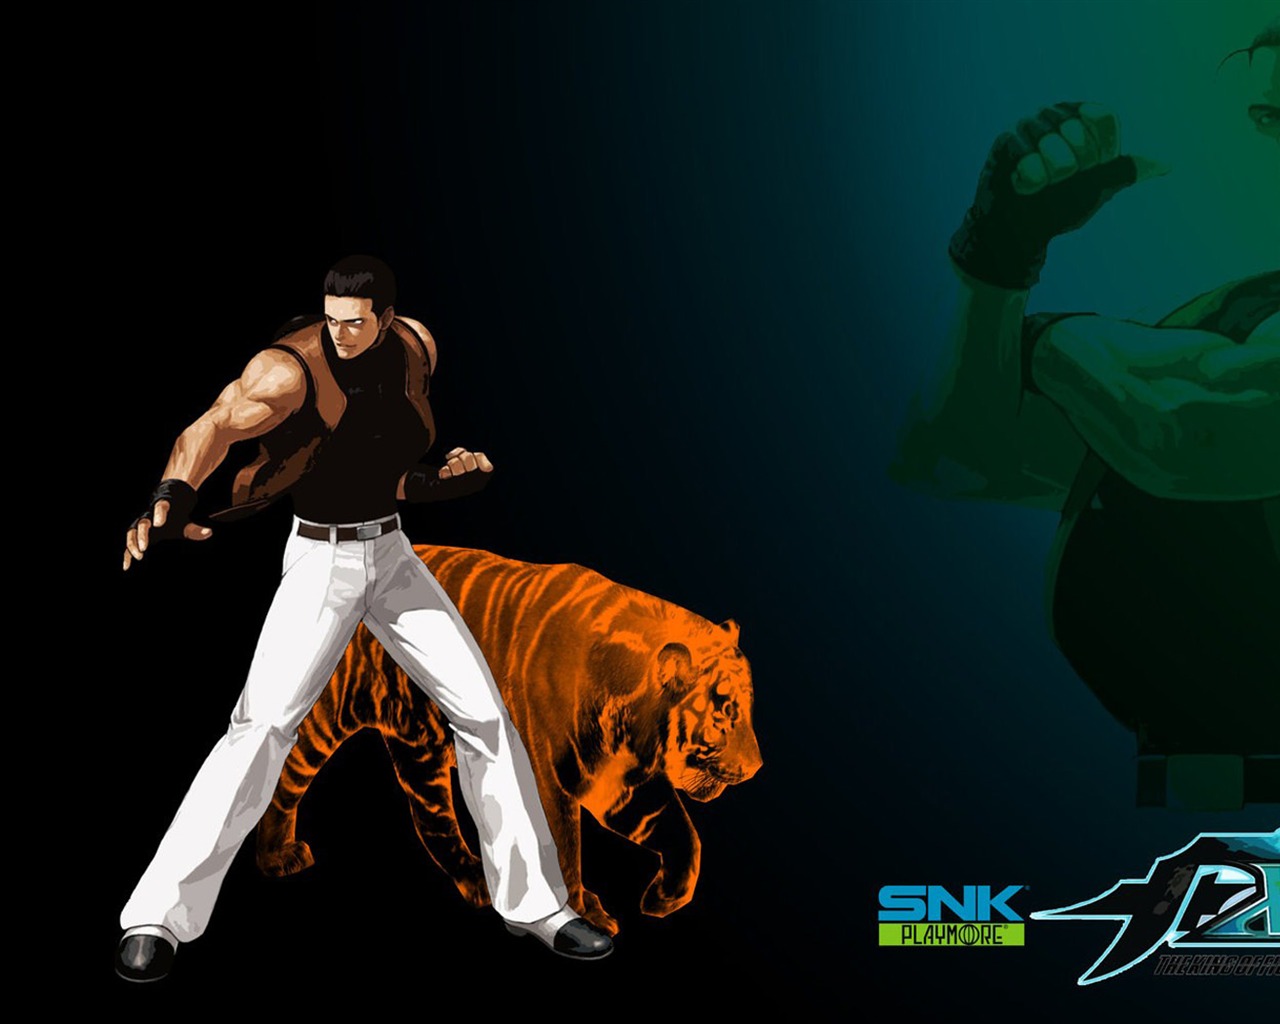 The King of Fighters XIII 拳皇13 壁纸专辑17 - 1280x1024